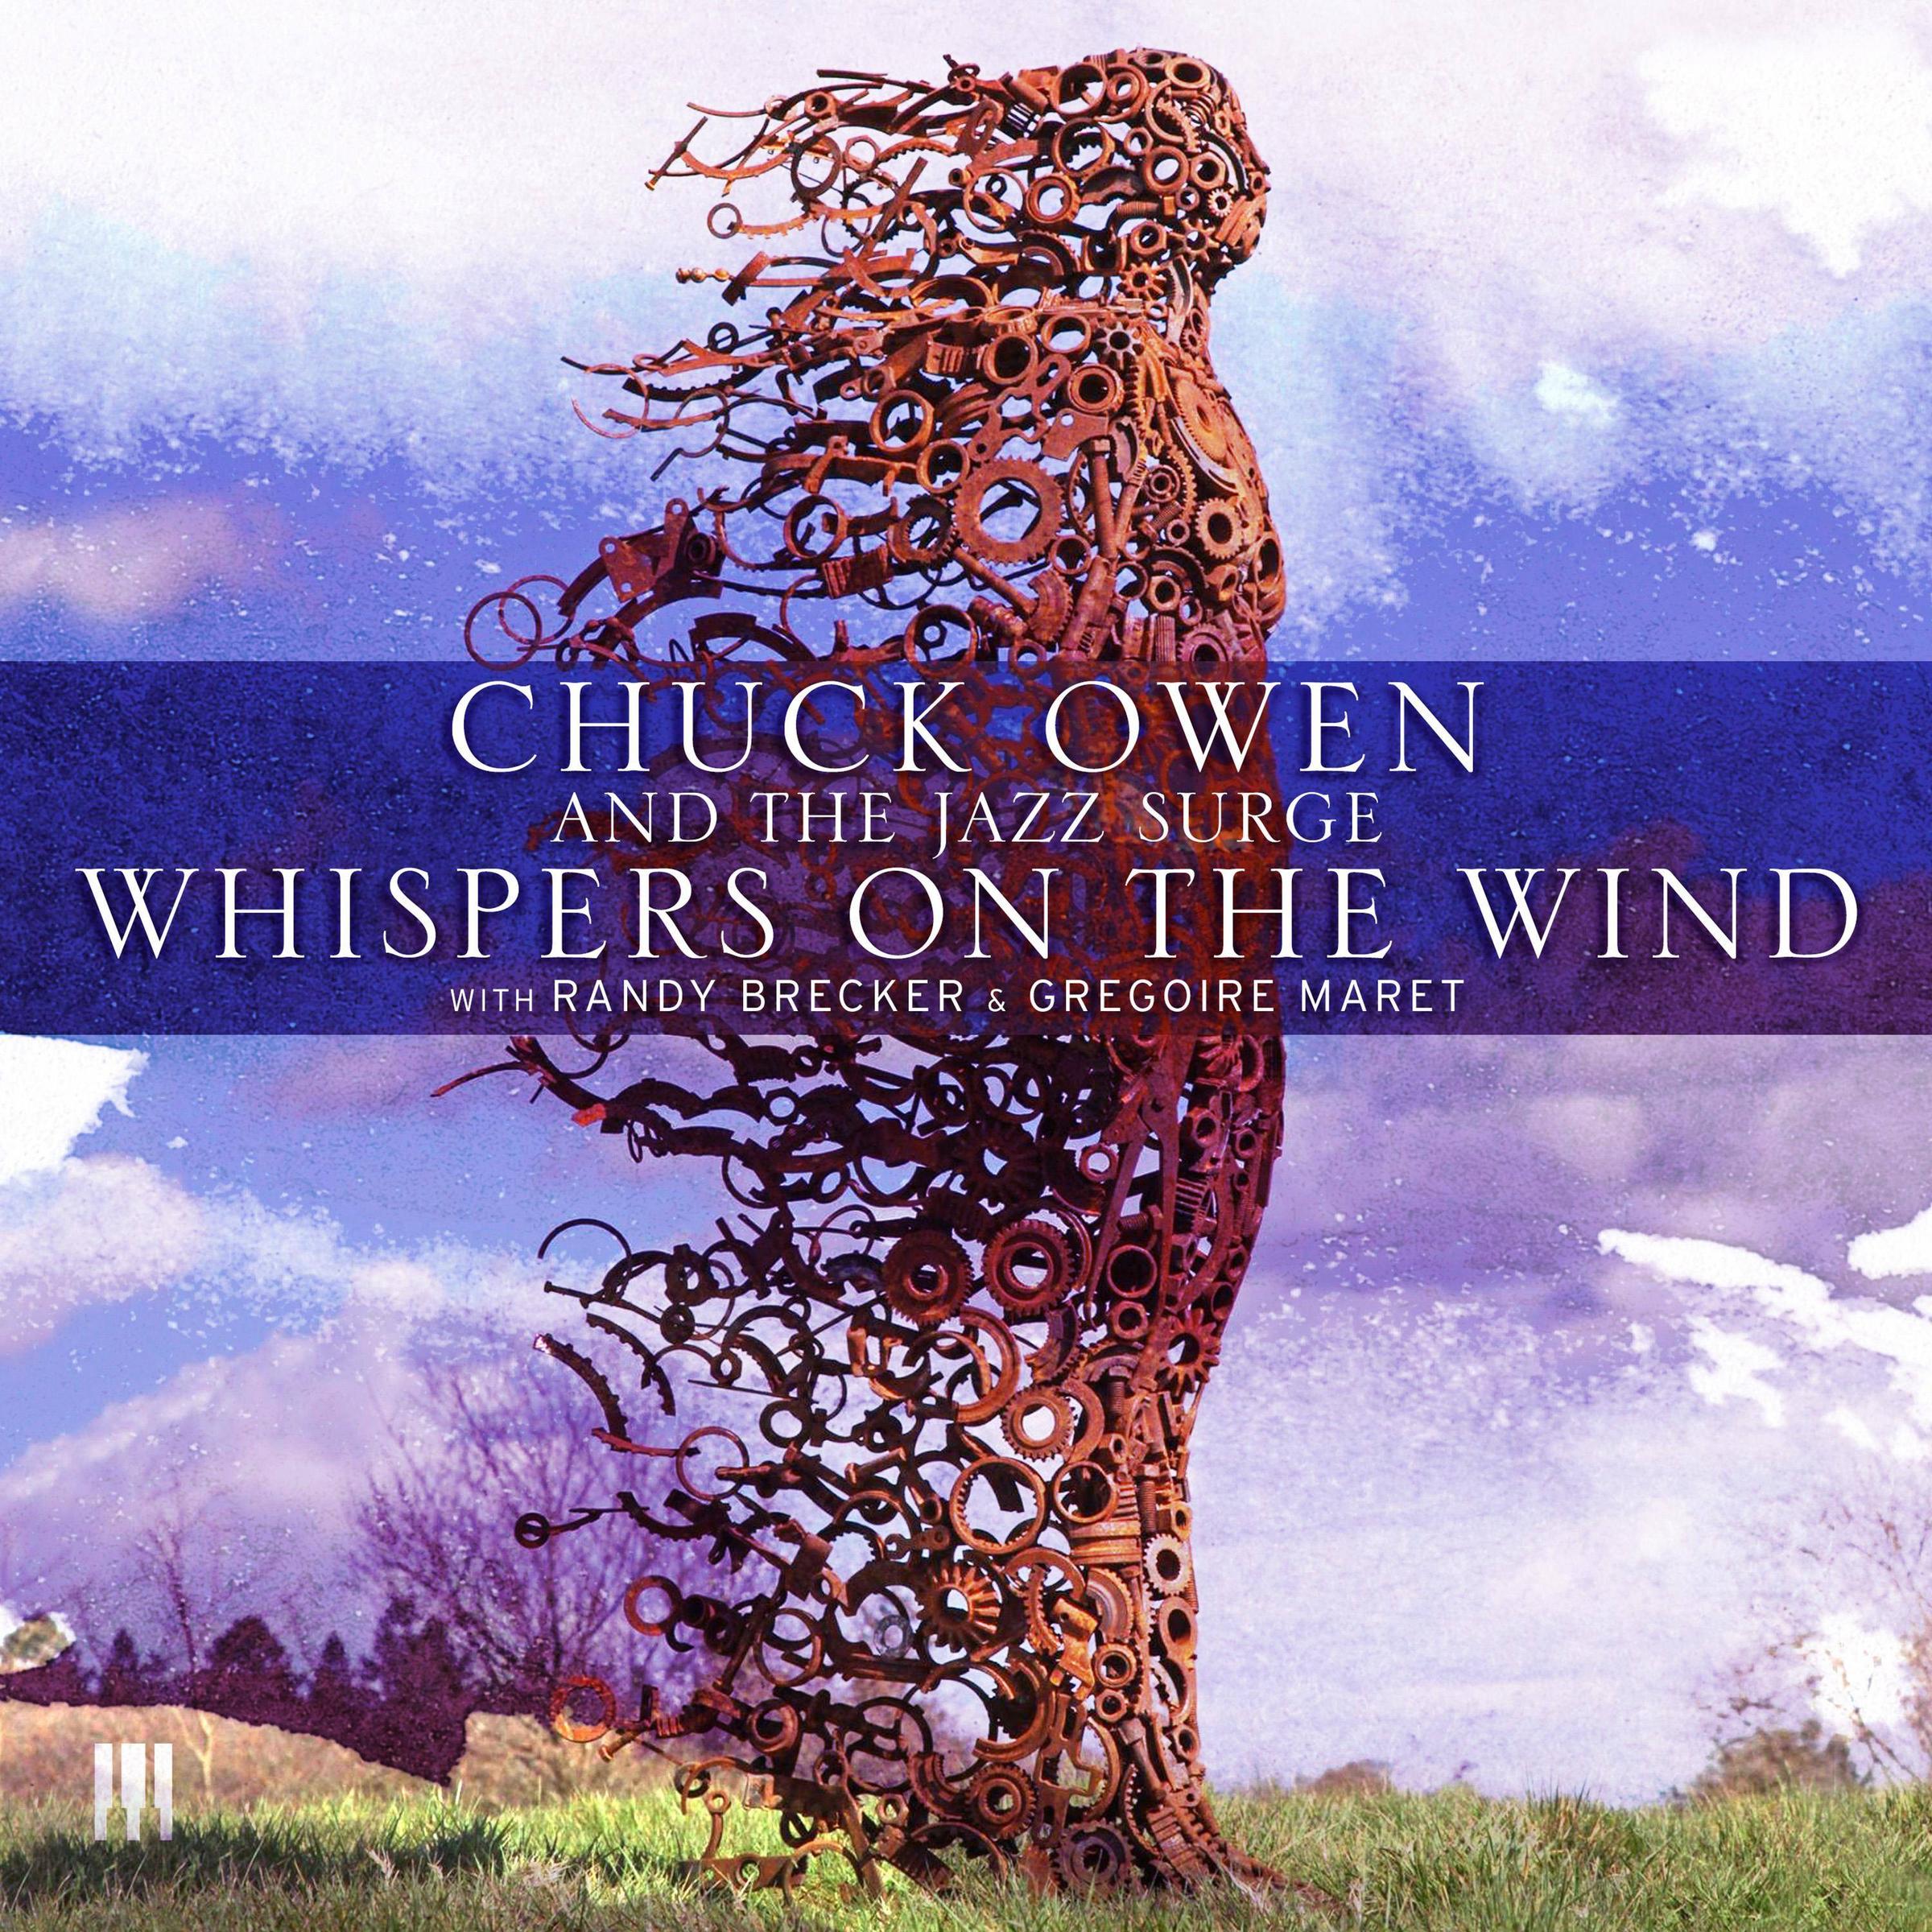 Chuck Owen and The Jazz Surge – Whispers On The Wind (2017) [HDTracks FLAC 24bit/96kHz]